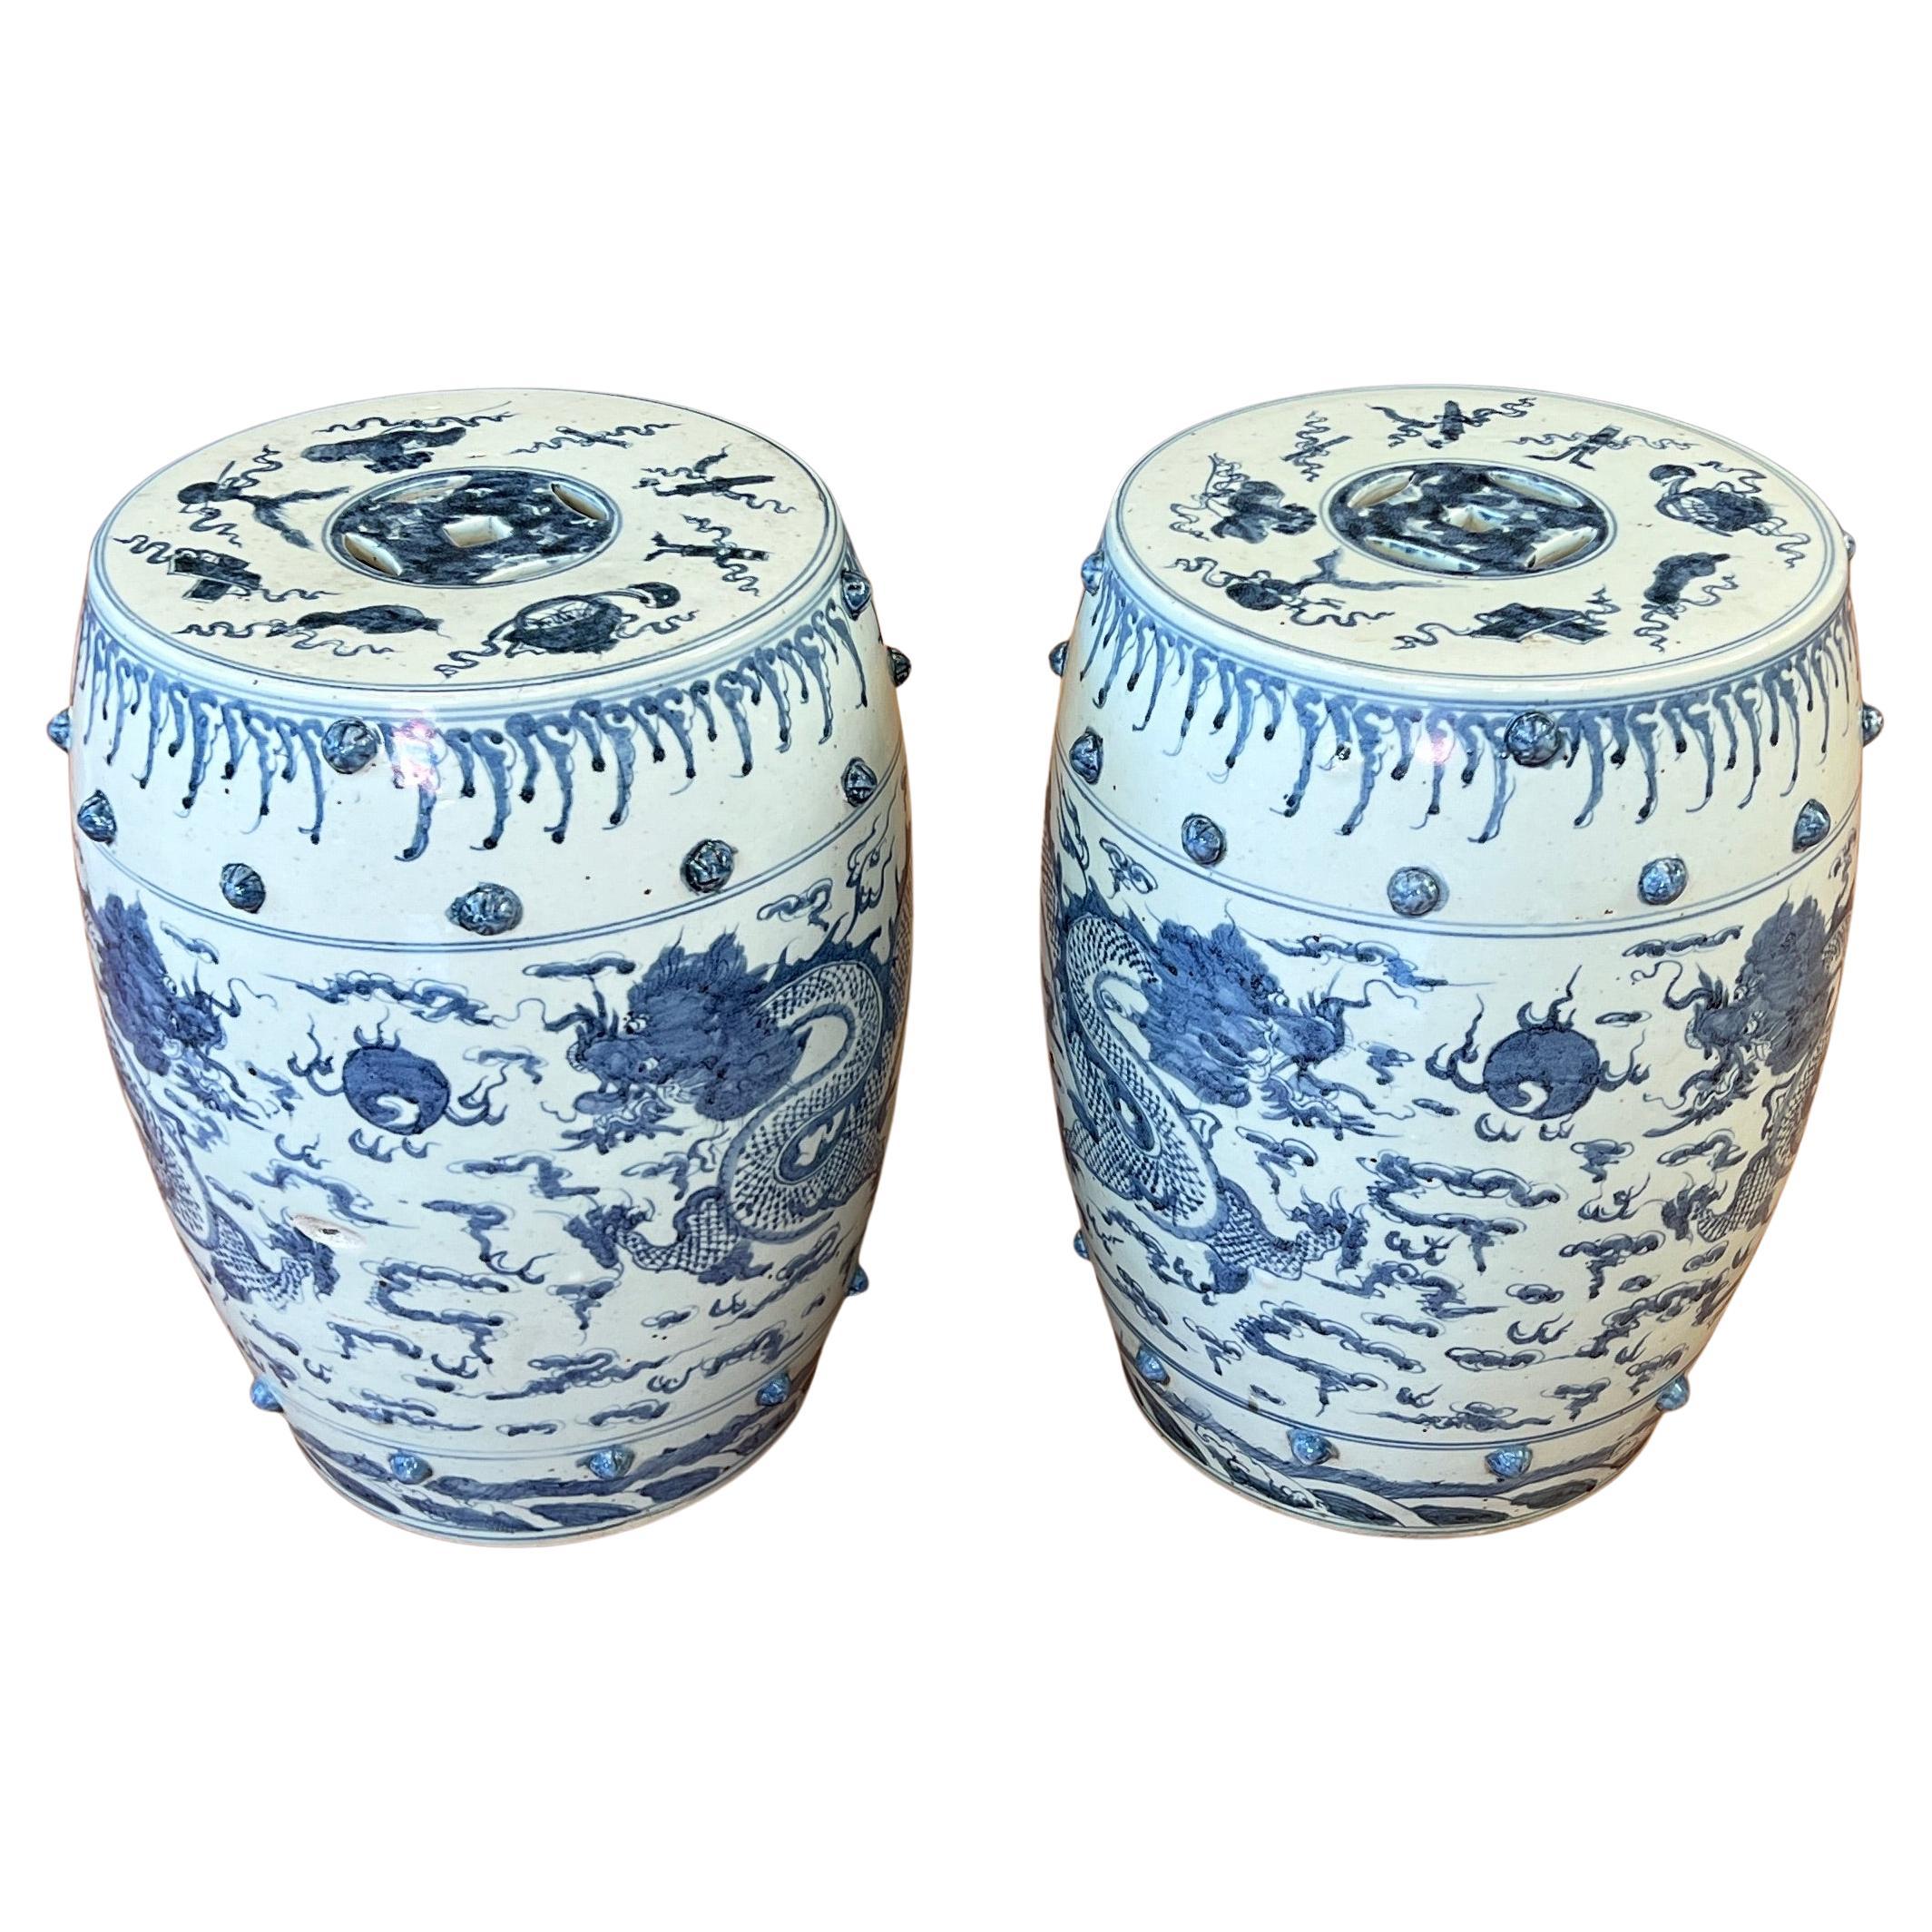 Pair of Ceramic Qing Dynasty Blue Dragon Stools 19th Century For Sale